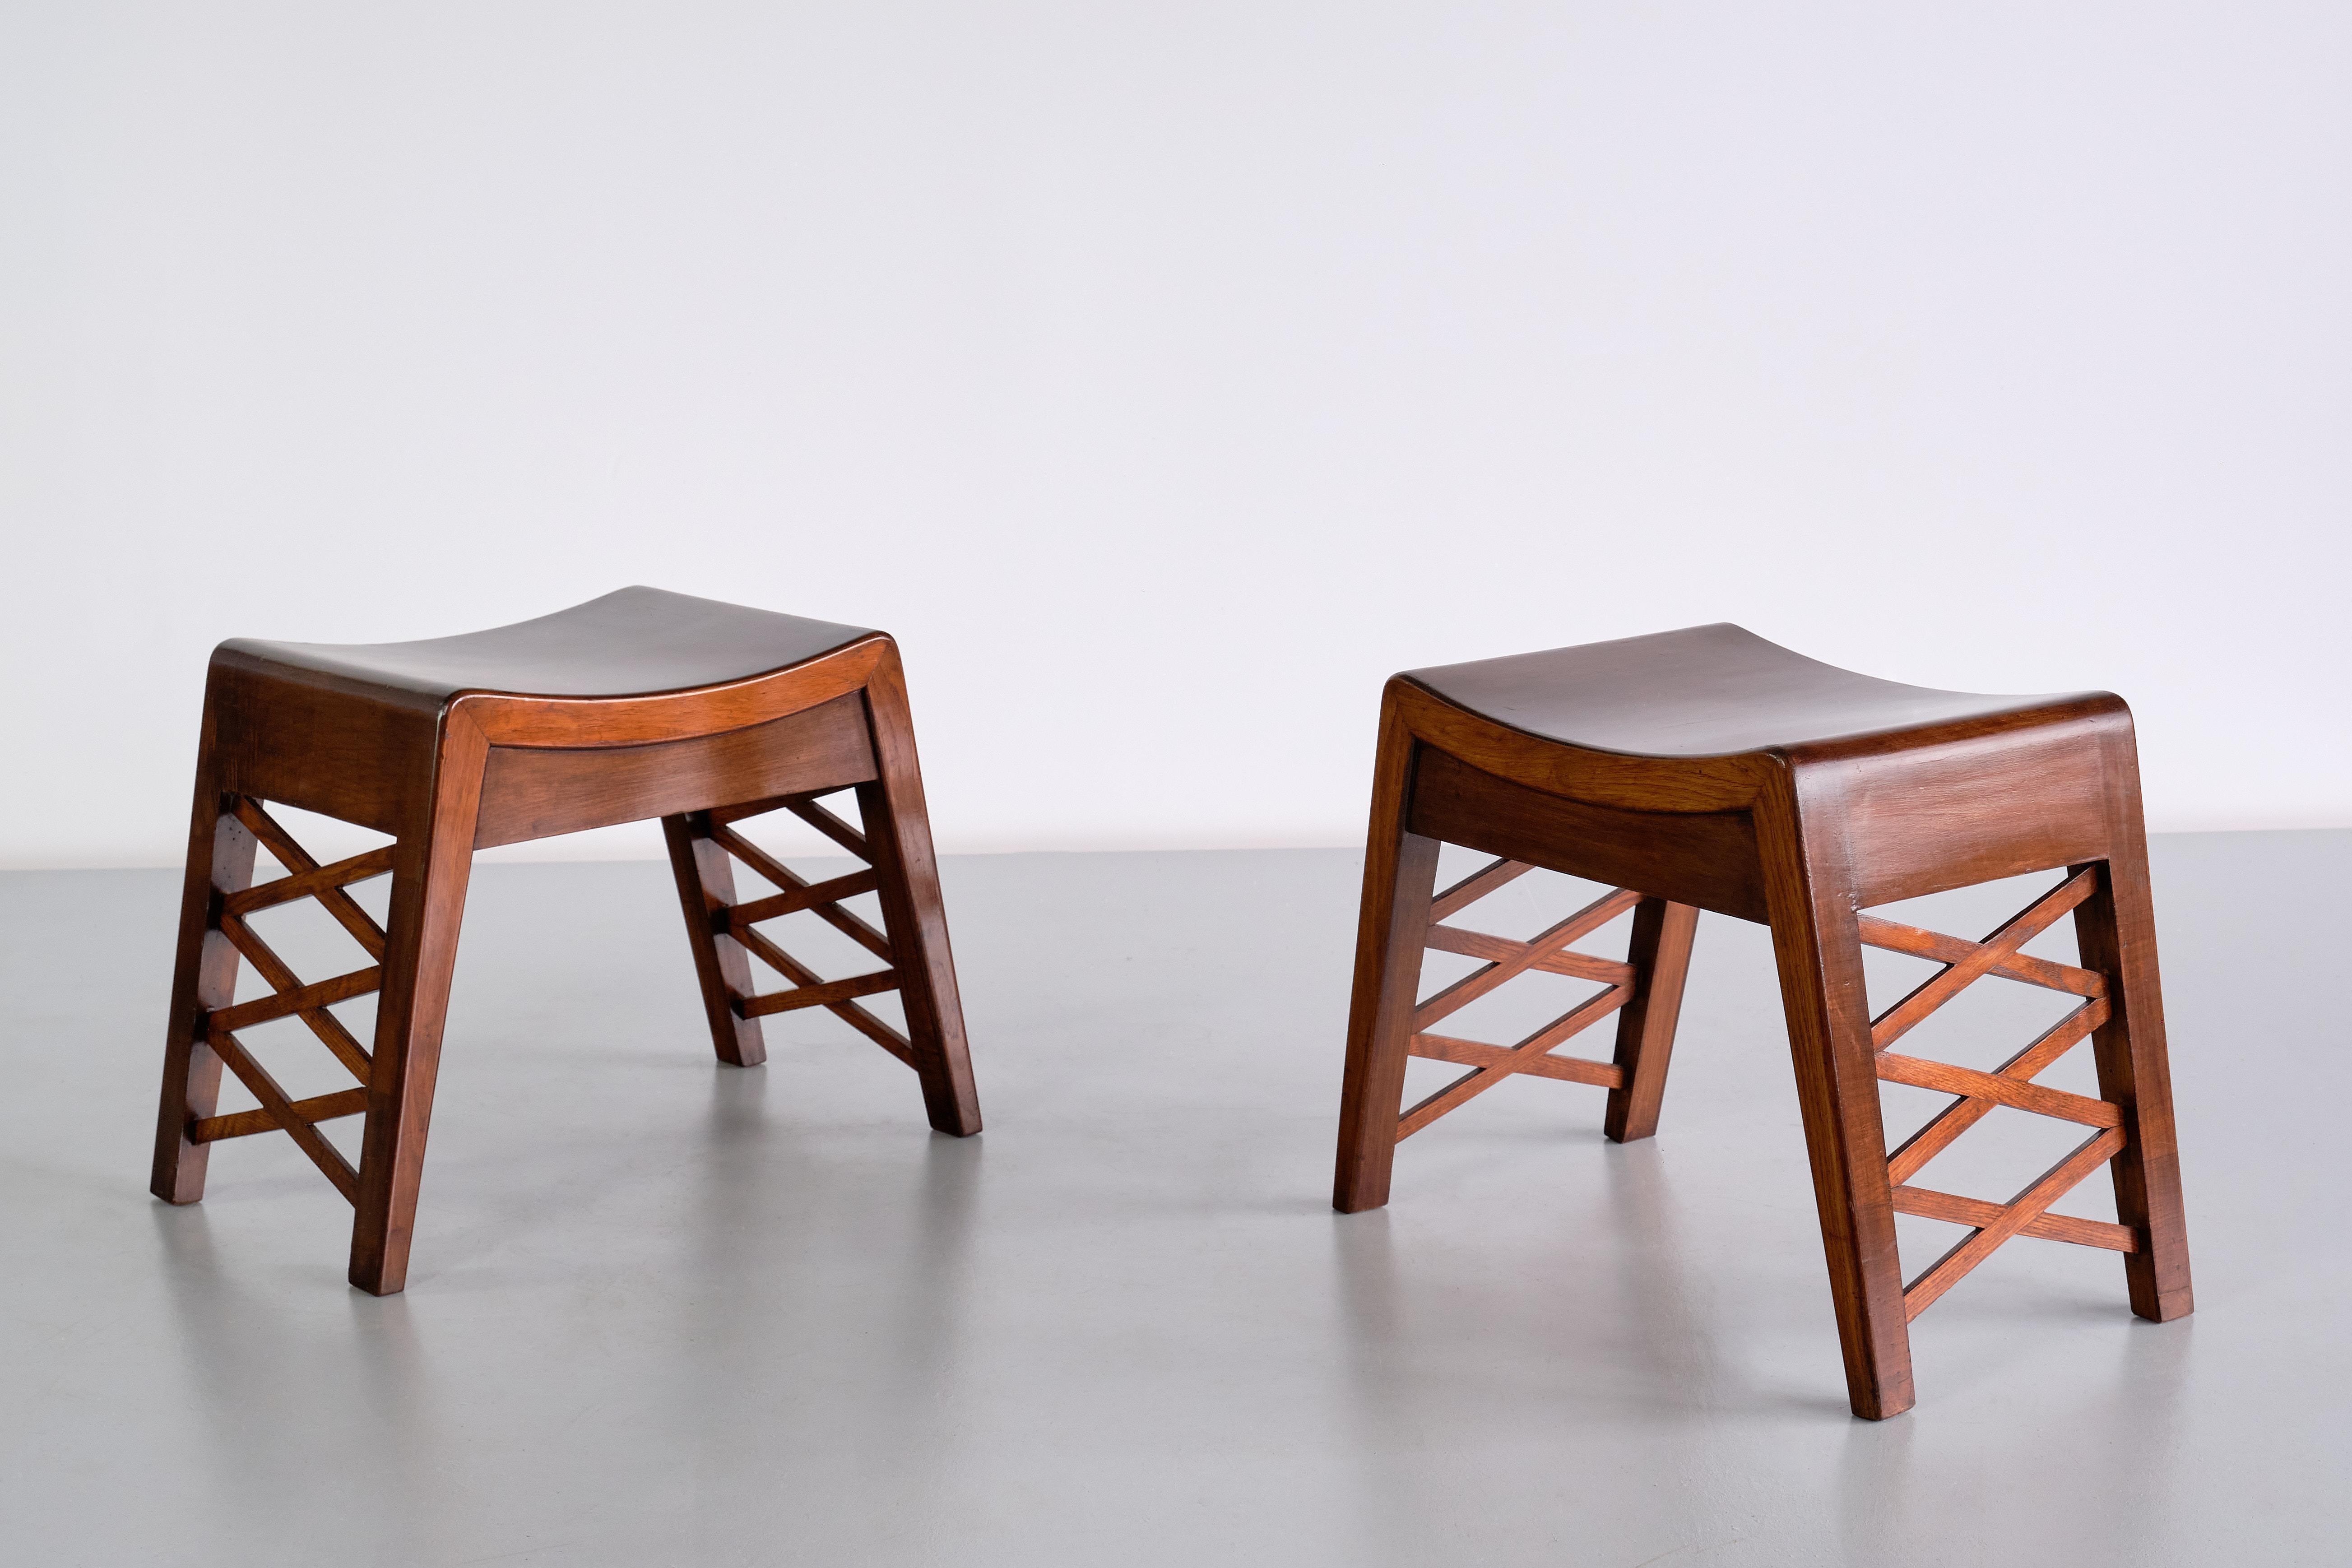 Italian Piero Portaluppi Attributed Pair of Stools in Chestnut Wood, Italy, Late 1930s For Sale